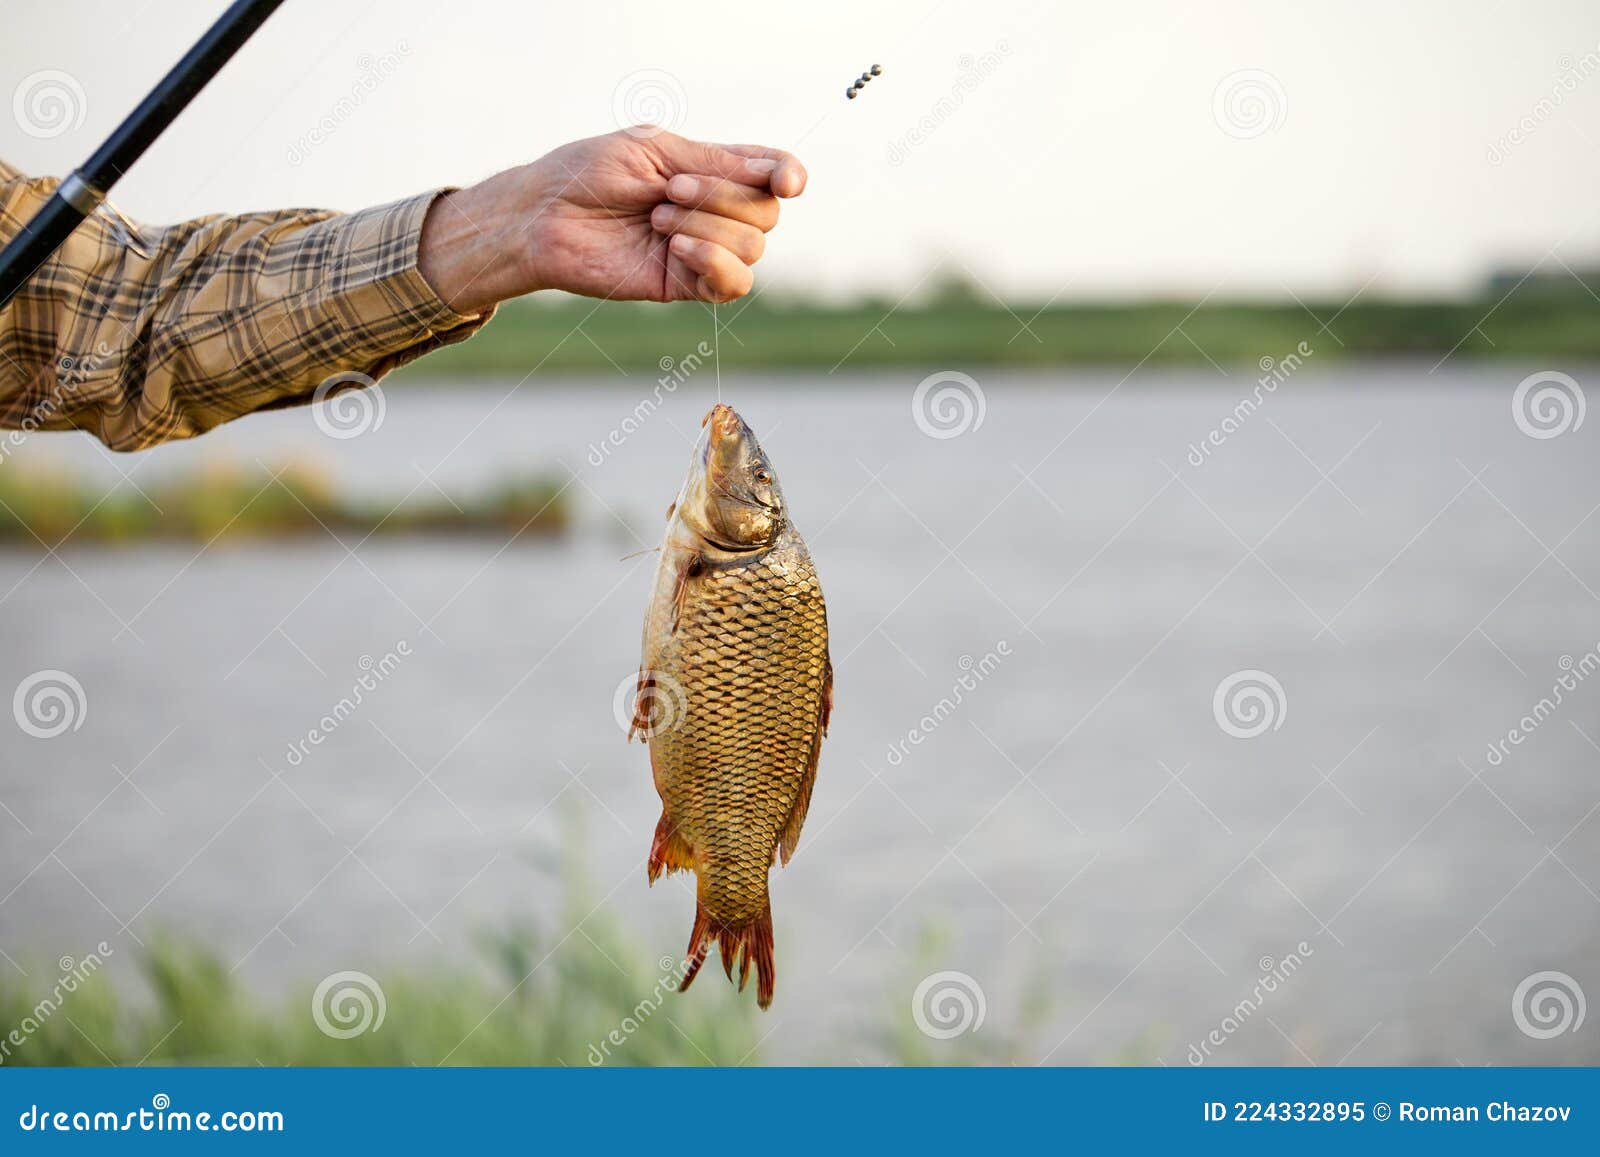 Caught Fish Hanging on Fishing Rod Close-up Photo, Lake in the